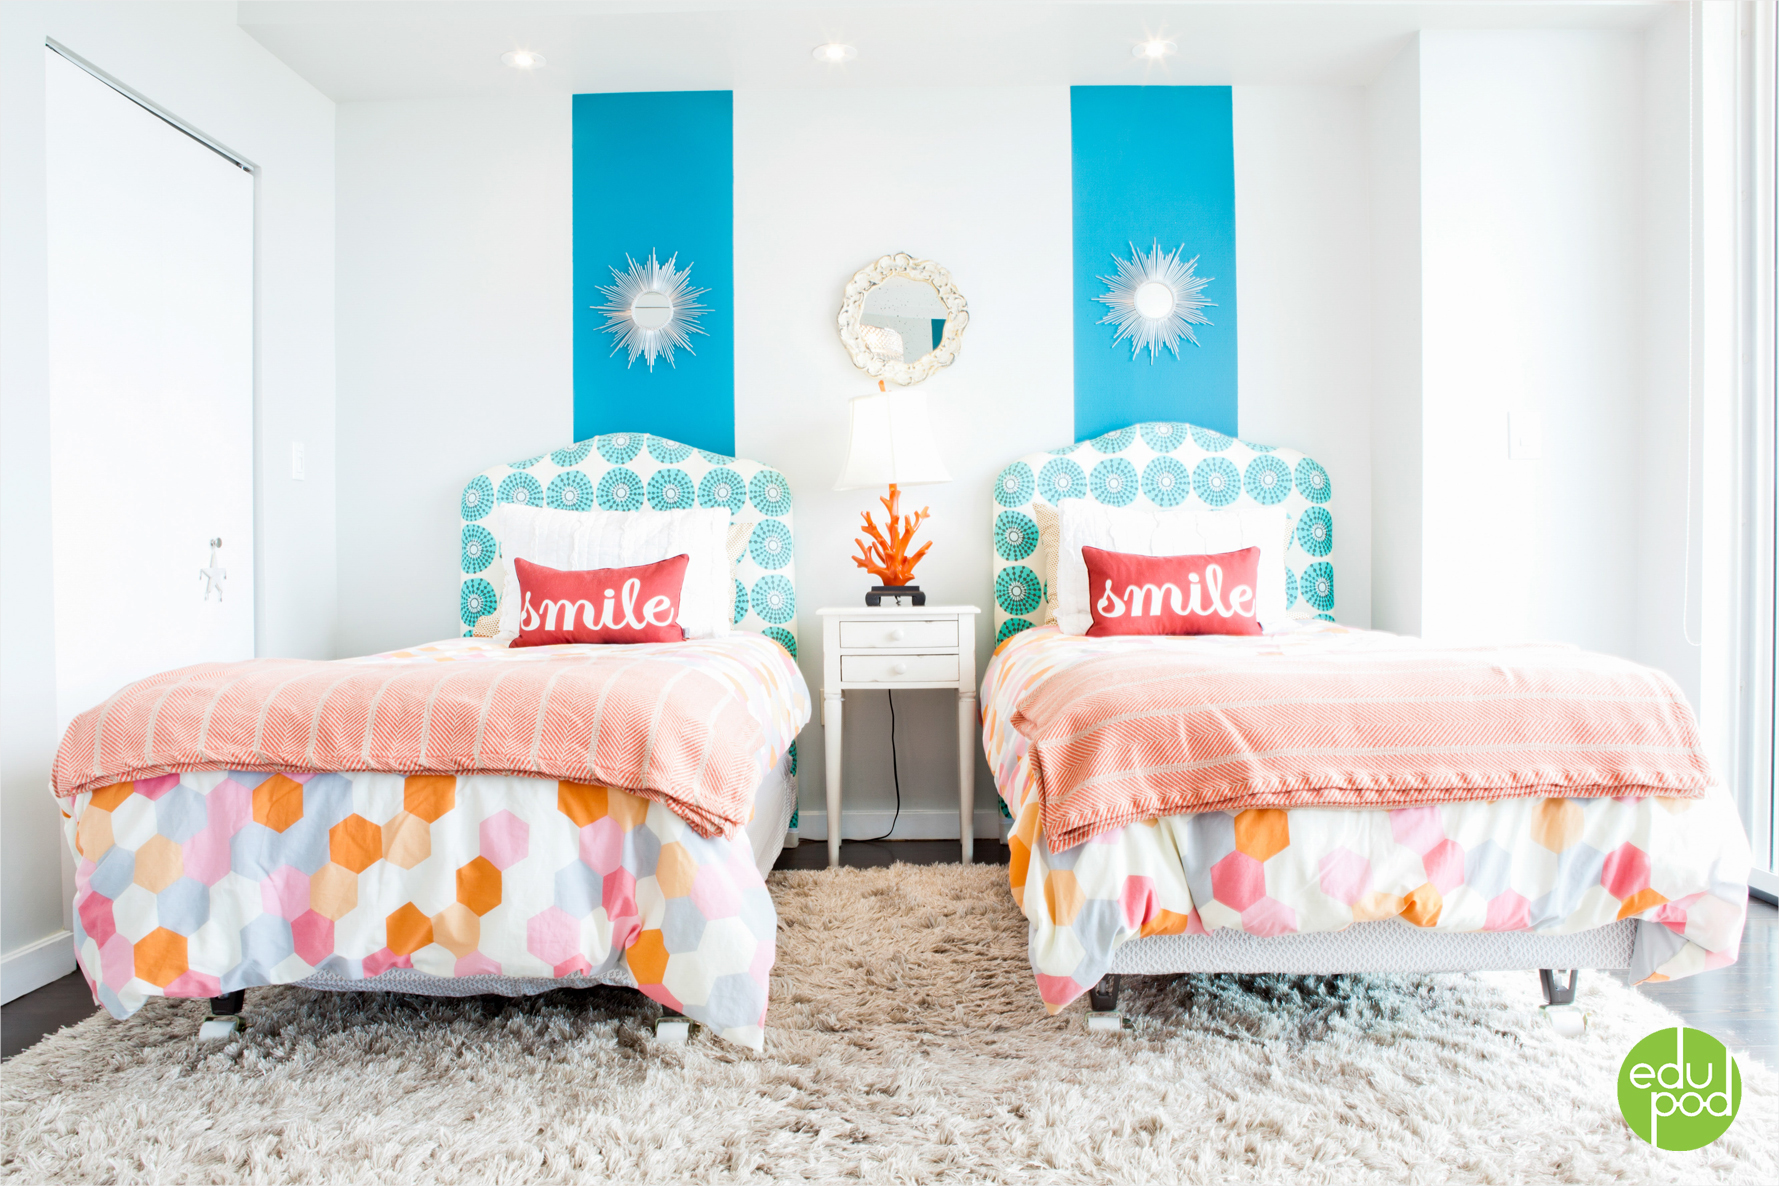 5 Tips For Creating A Shared Bedroom For Kids